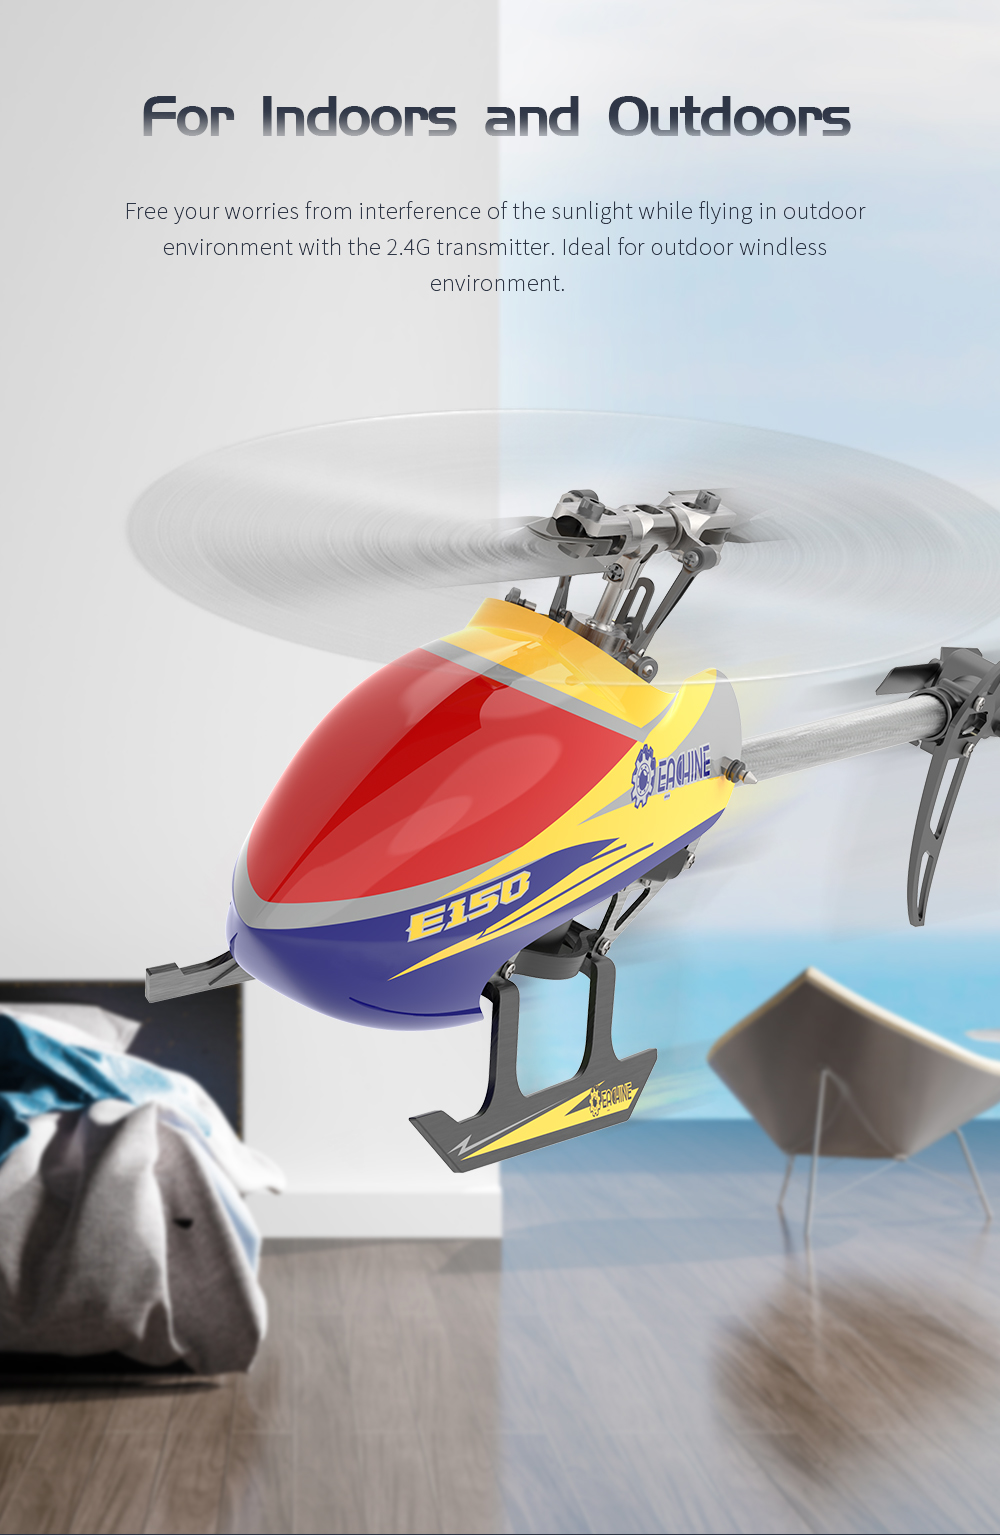 Eachine-E150-24G-6CH-6-Axis-Gyro-3D6G-Dual-Brushless-Direct-Drive-Motor-Flybarless-RC-Helicopter-BNF-1900365-9